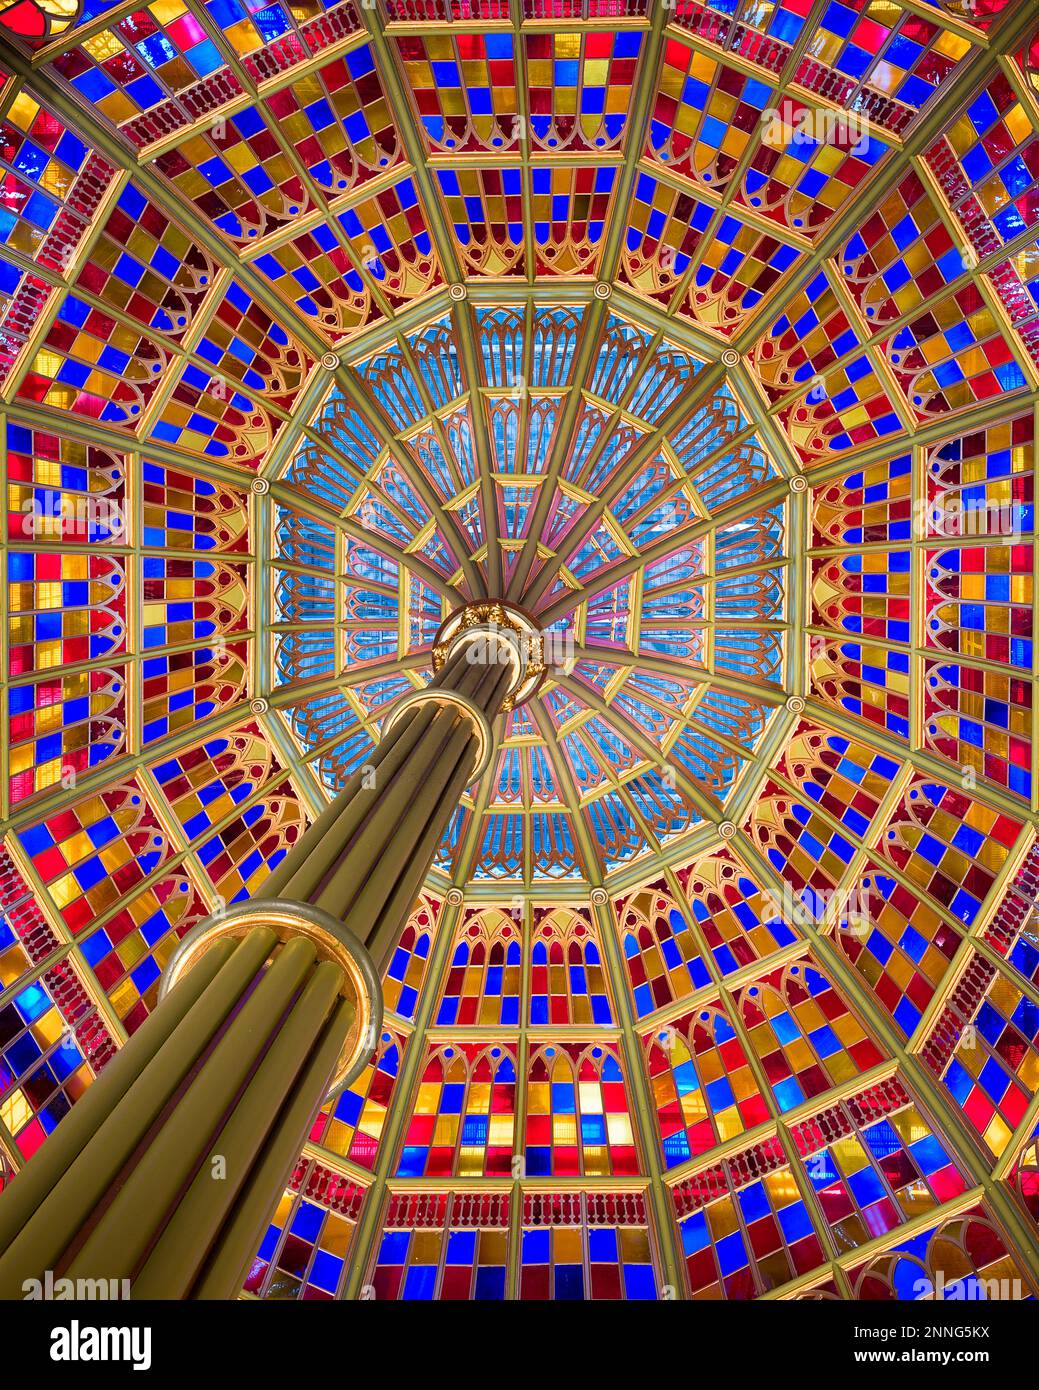 Inner dome and stained glass ceiling inside of Louisiana's Old State Capitol building at 100 North Blvd in Baton Rouge, Louisiana Stock Photo